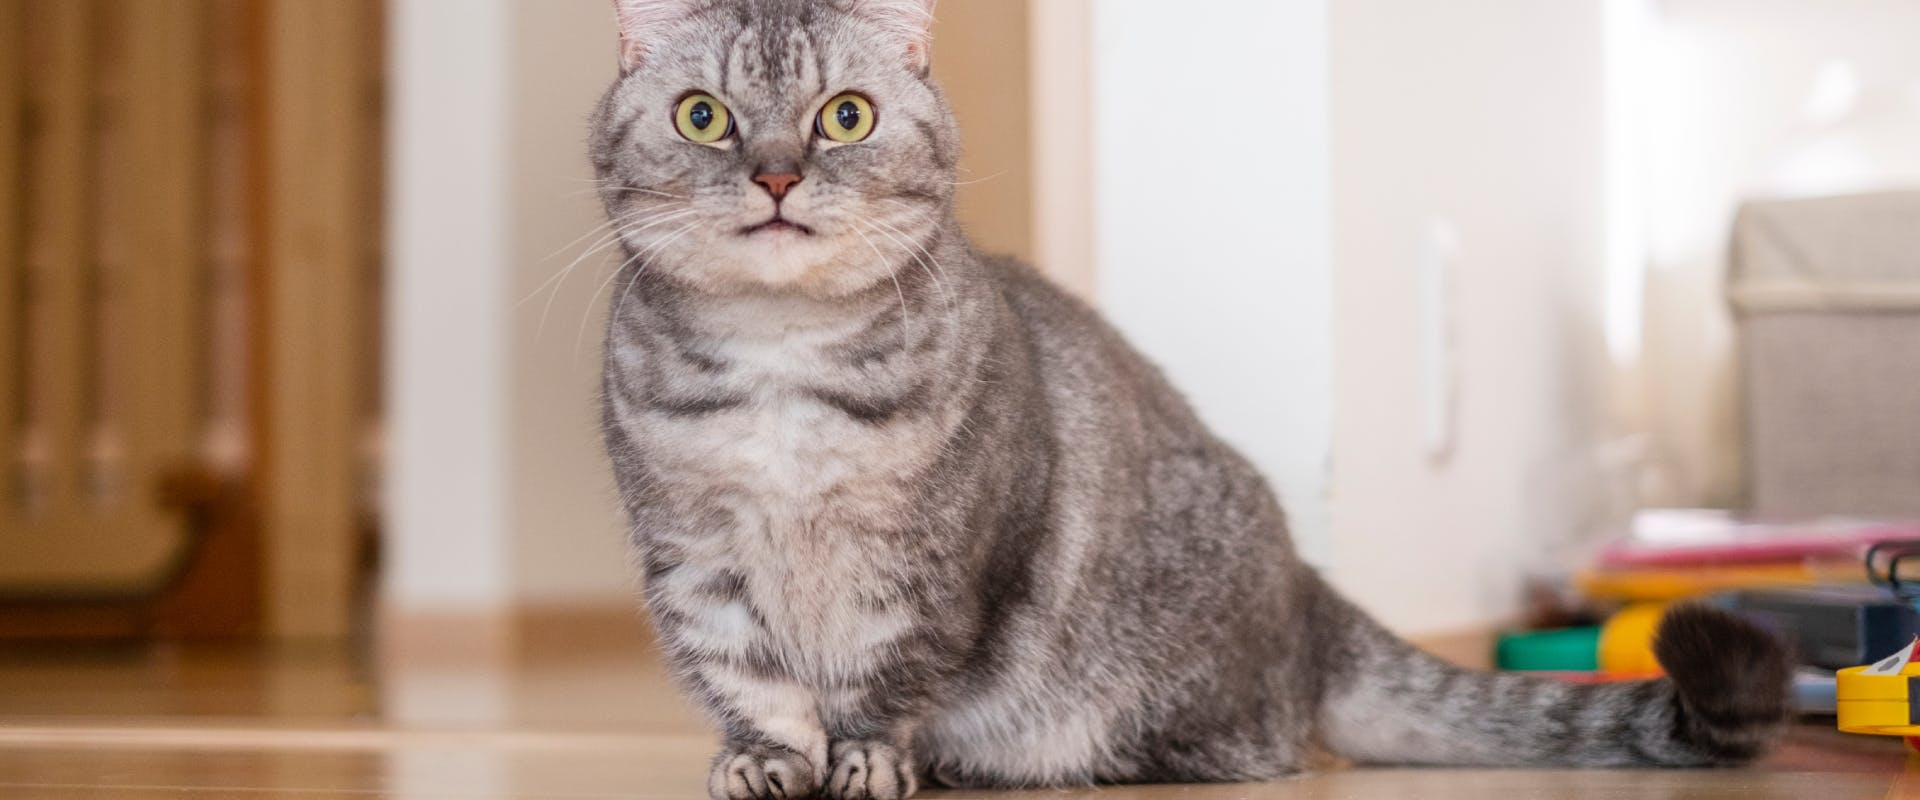 a gray tabby munchkin cat on a wooden floor facing the camera